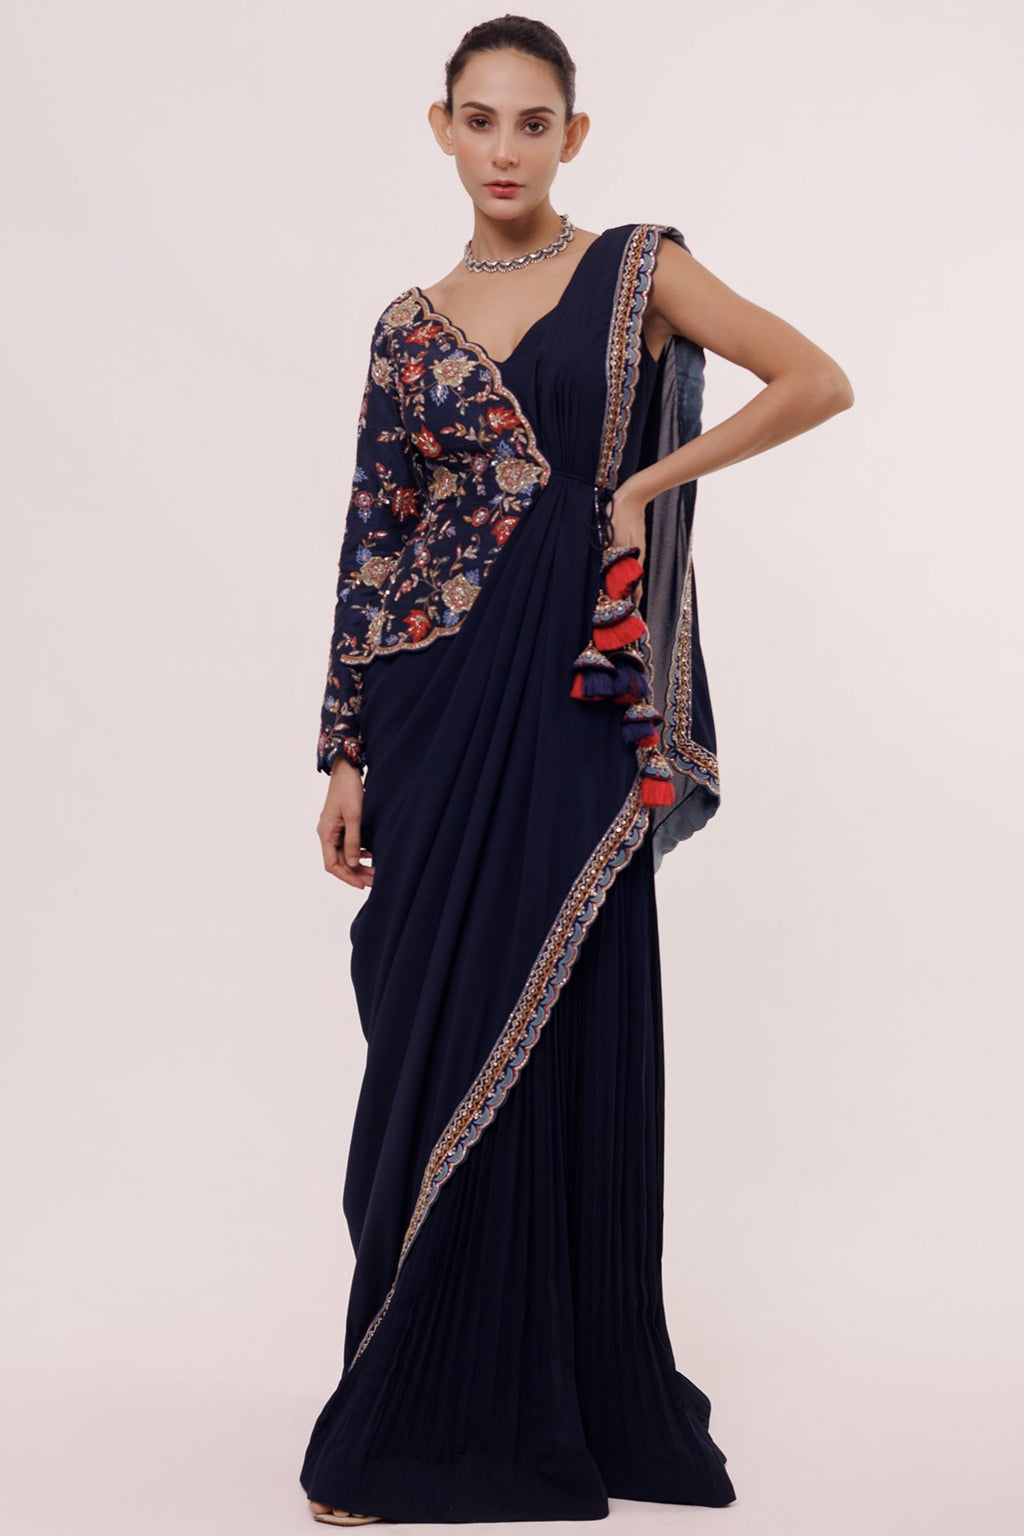 Shop beautiful navy blue drape saree online in USA with embroidered faux jacket. Look your best at parties and weddings in beautiful designer sarees, embroidered sarees, handwoven sarees, silk sarees, organza saris from Pure Elegance Indian saree store in USA.-full view